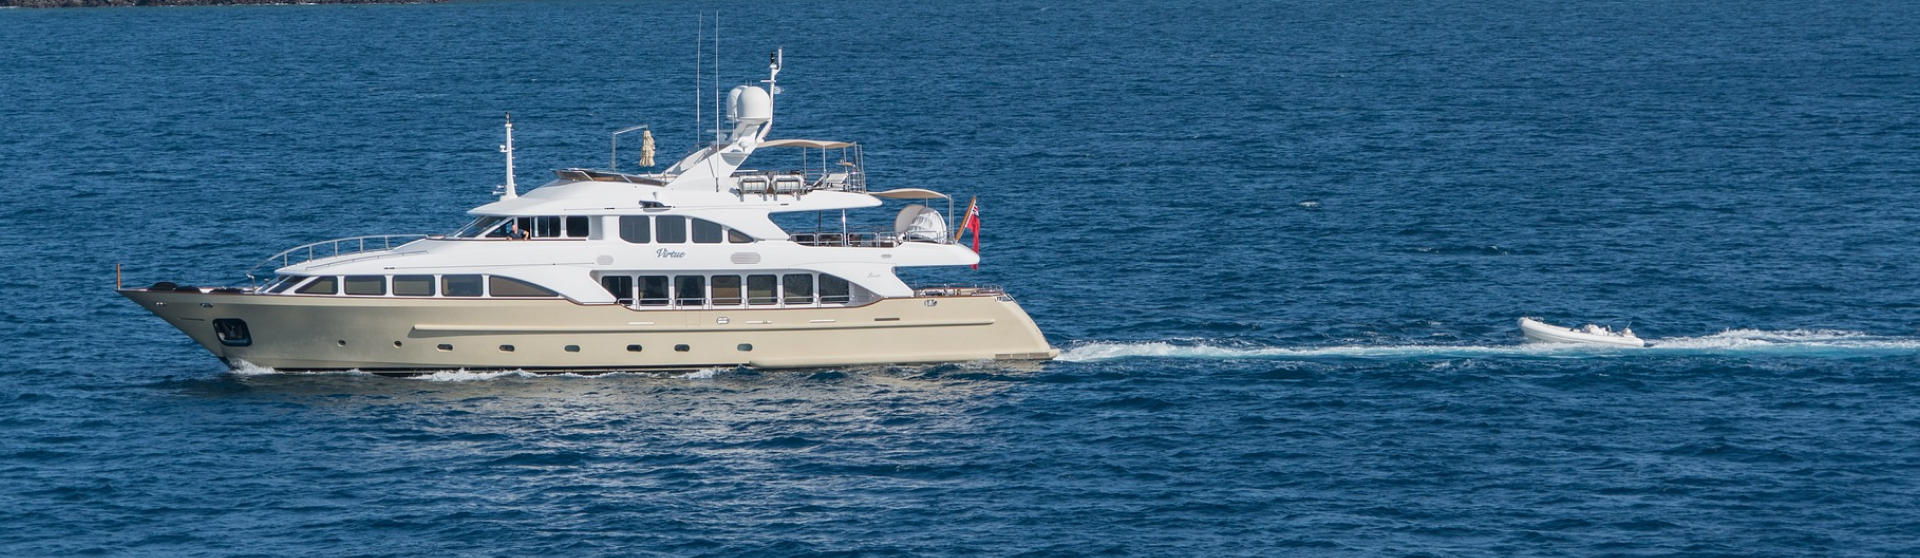 Selling your yacht can be an enjoyable experience